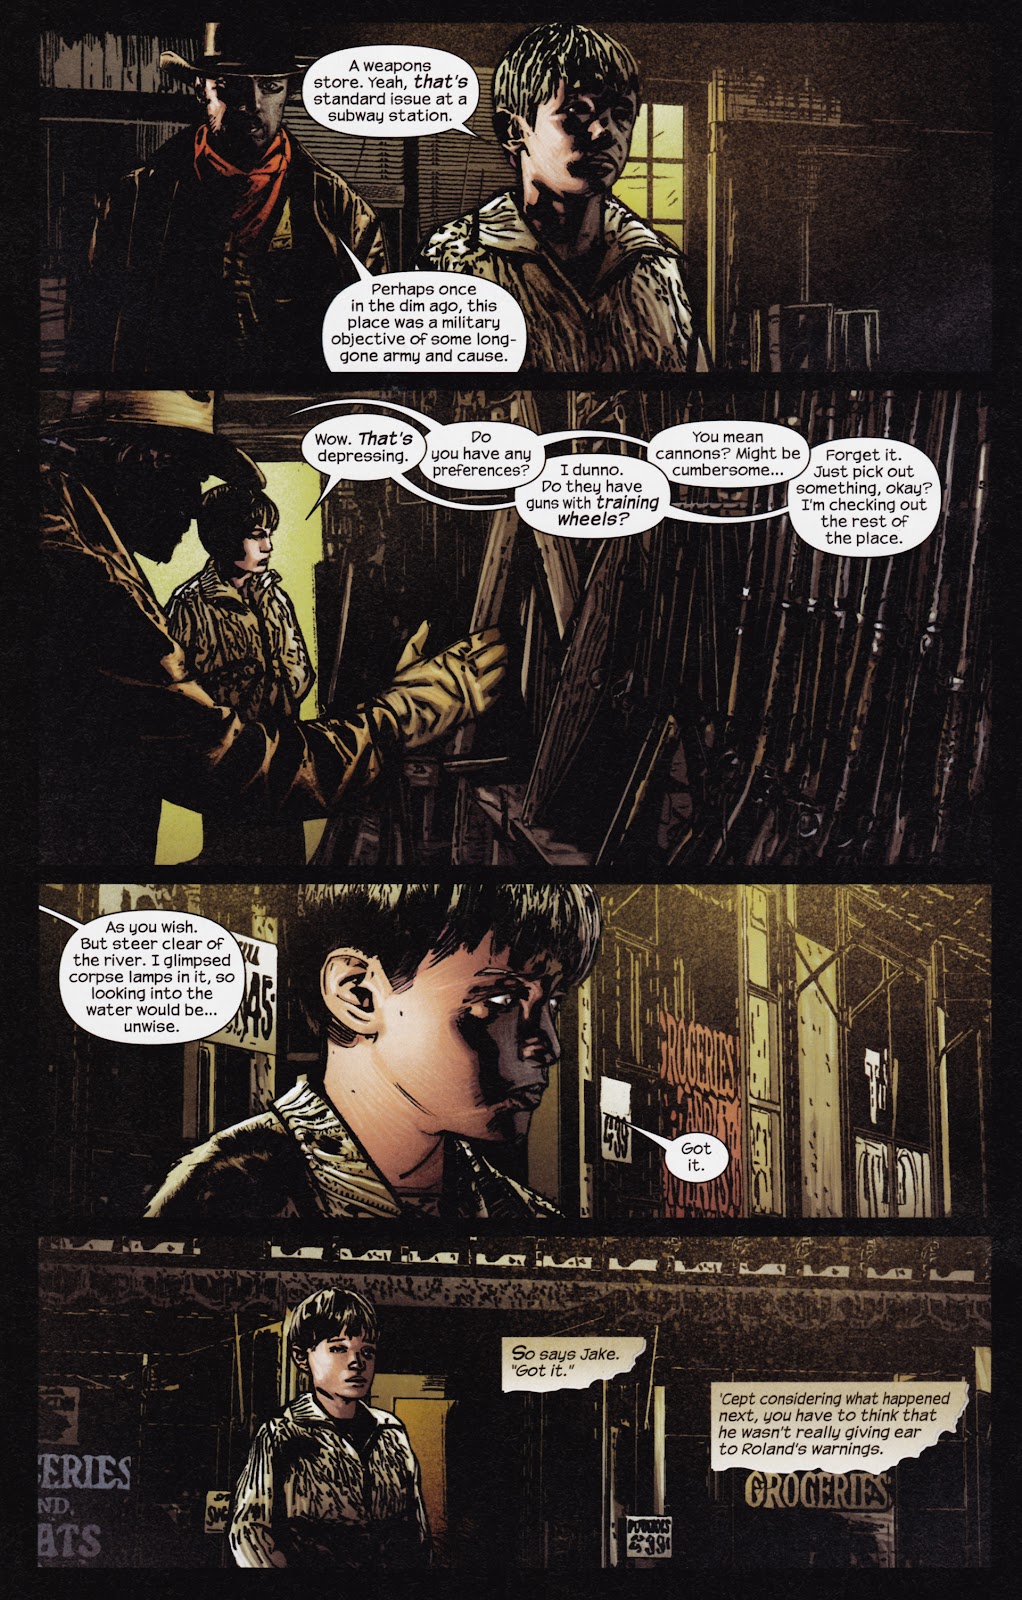 Dark Tower: The Gunslinger - The Man in Black issue 3 - Page 20